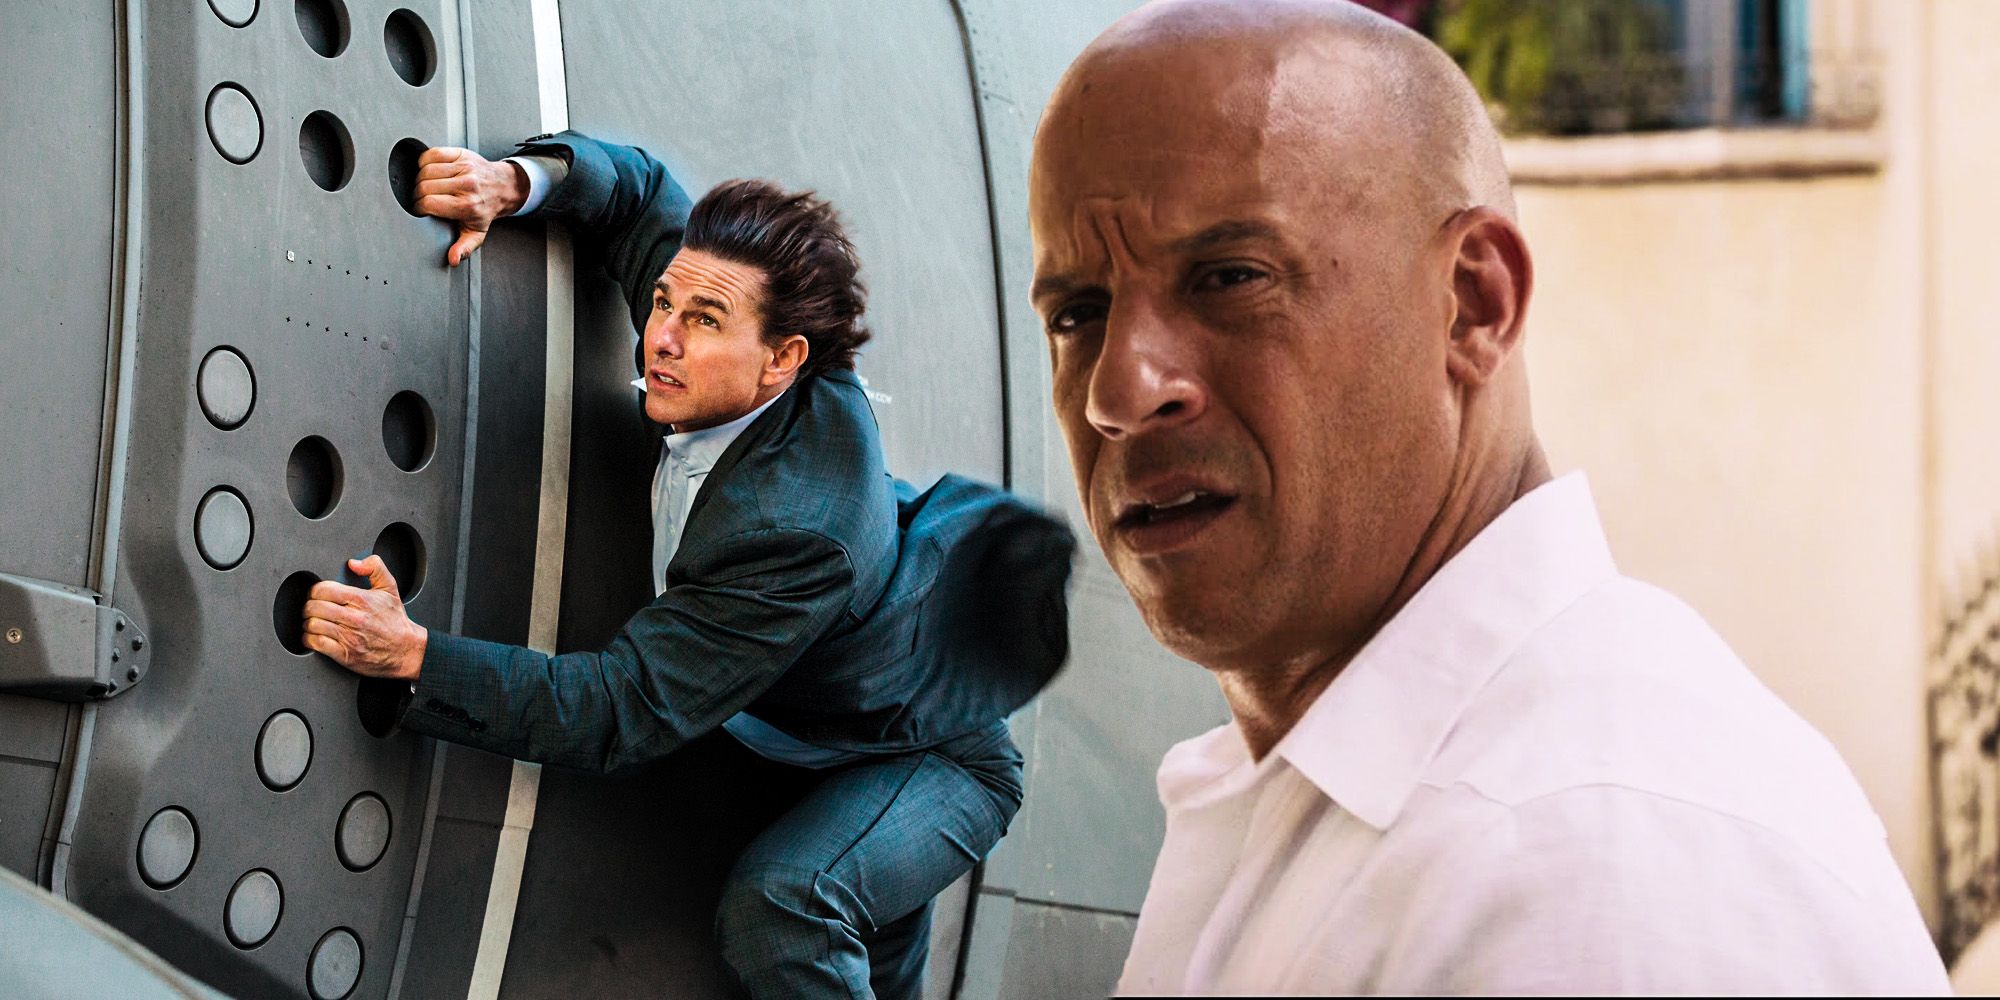 Vin Diesel Fast and furious 10 Borrow Ridiculous Stunts From Other Movies mission impossible plane stunt